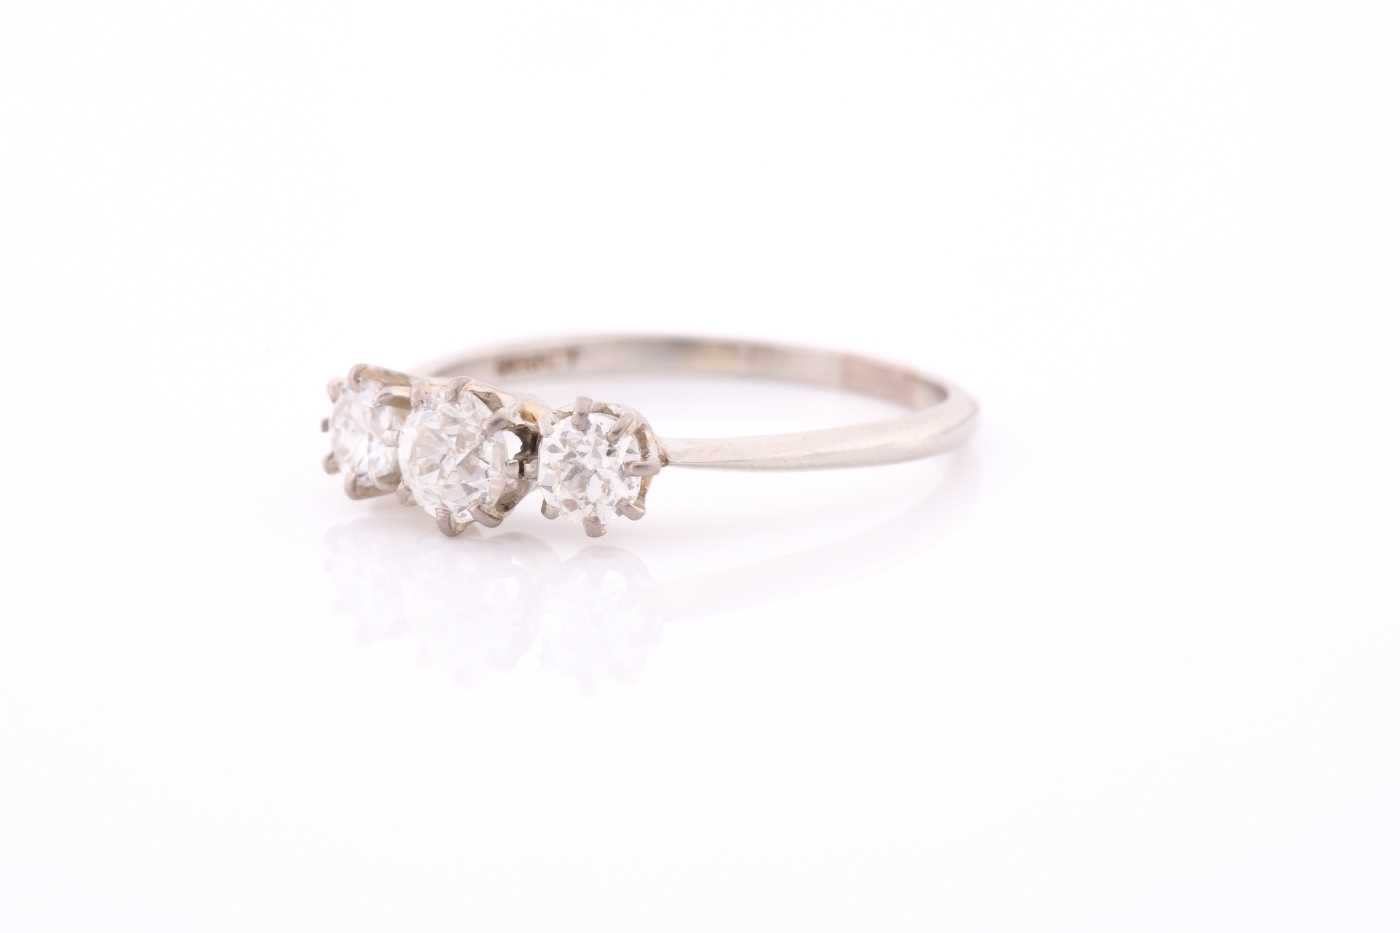 An 18ct white gold and diamond ring, set with three old-cut diamonds of approximately 0.70 carats - Image 4 of 4